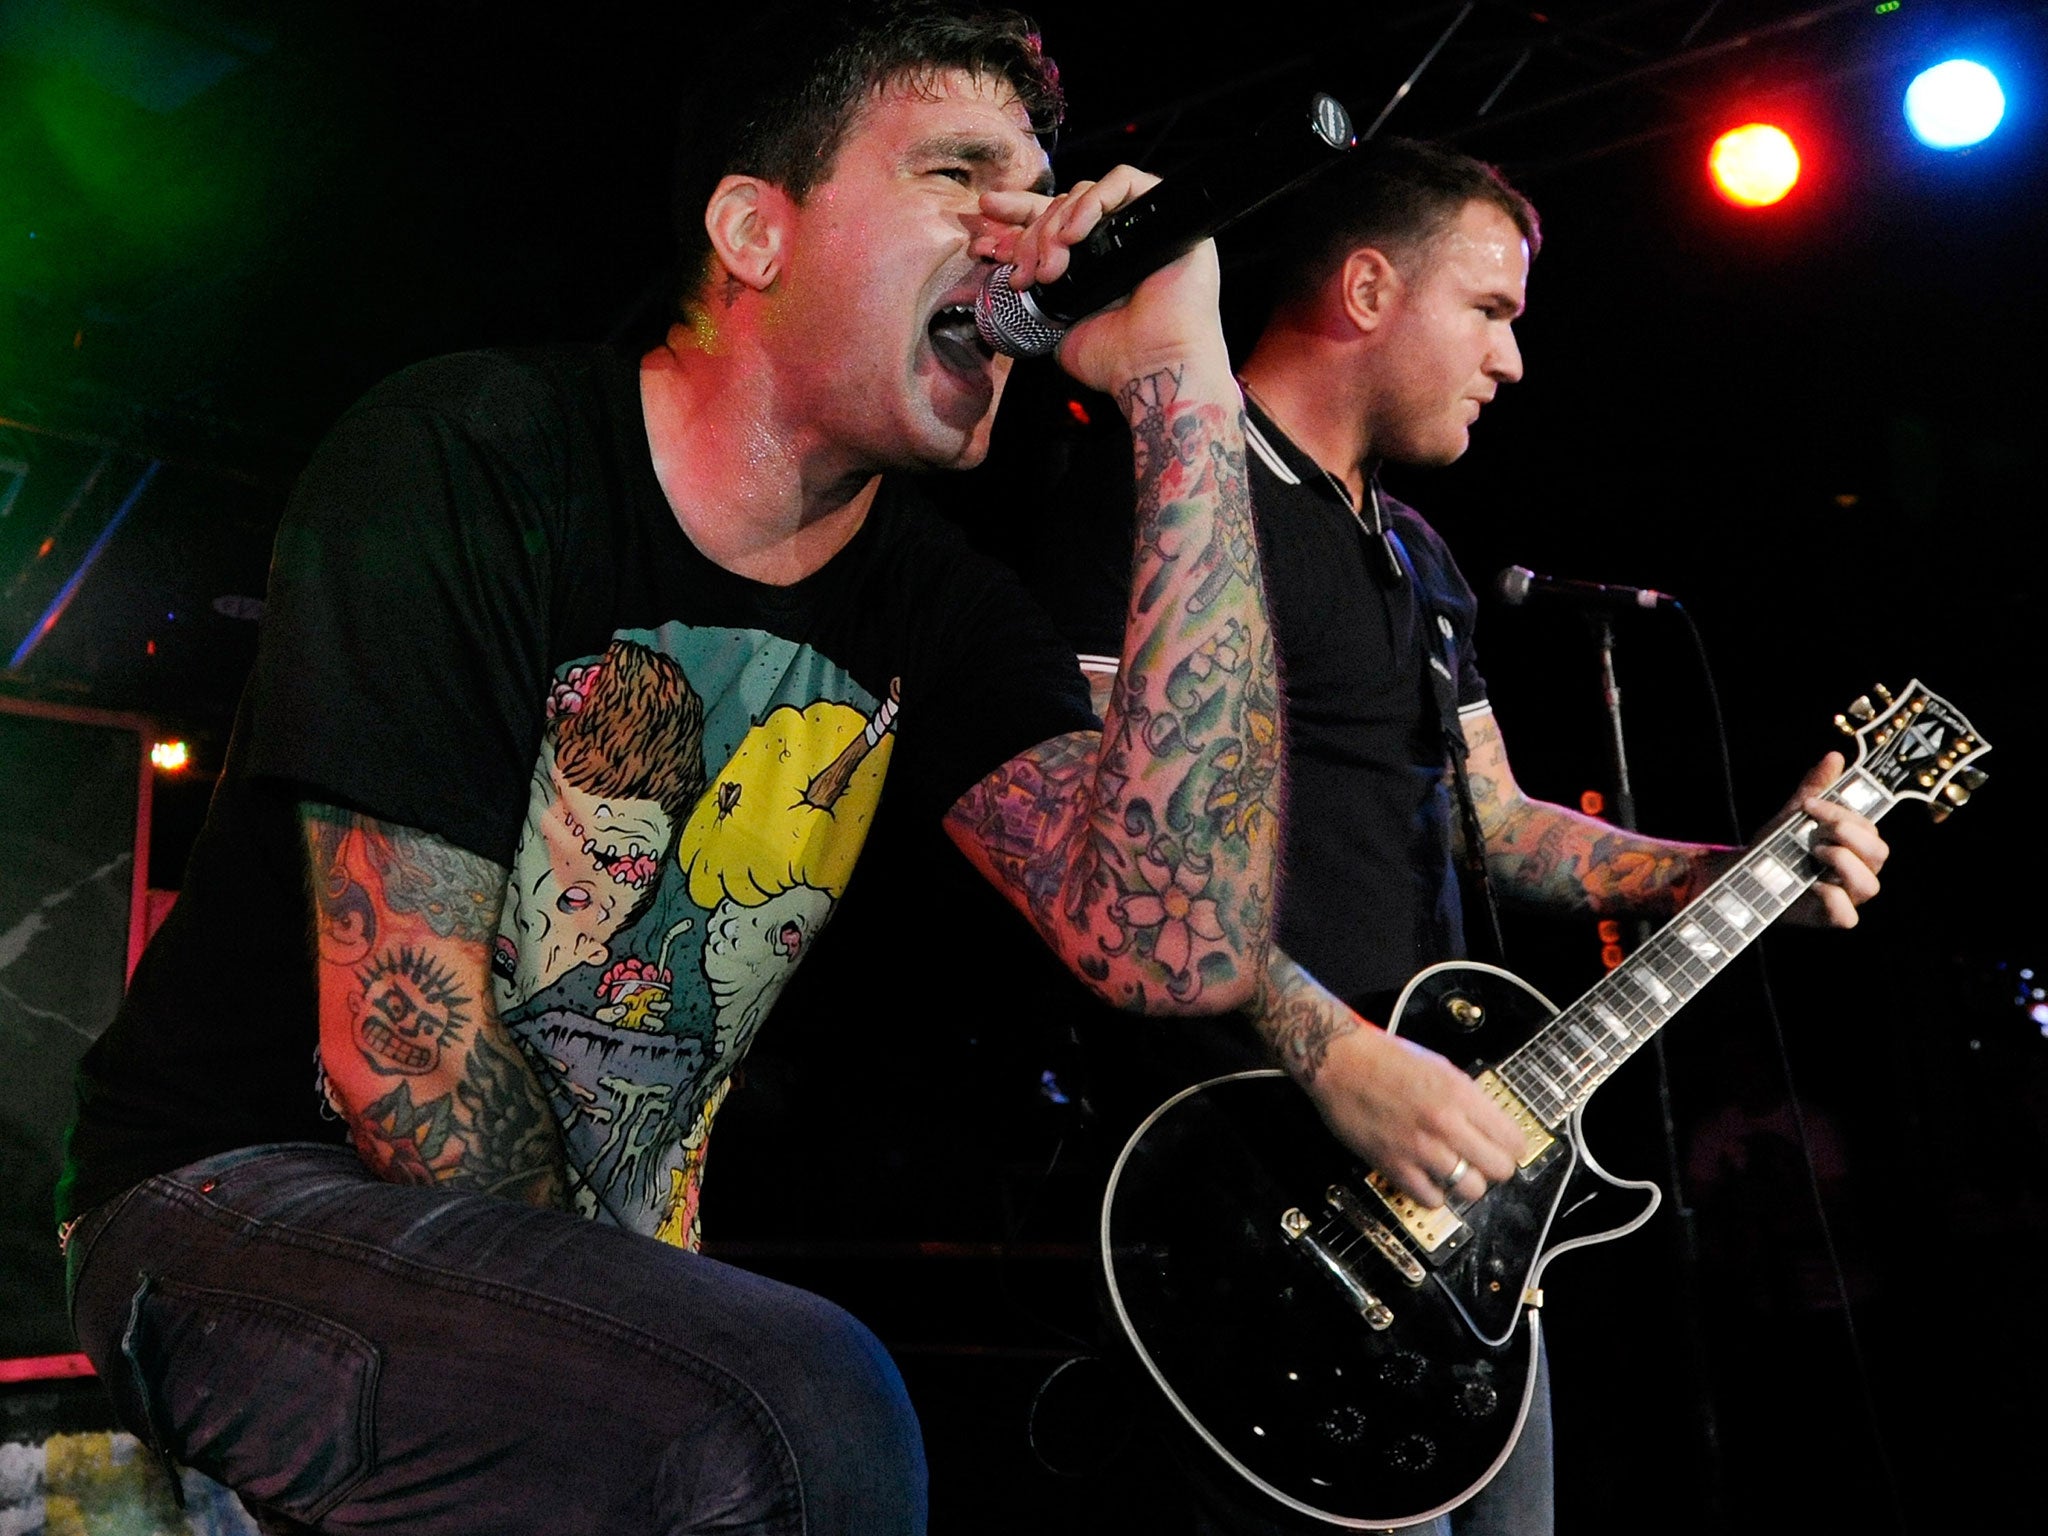 New Found Glory singer Jordan Pundik (L) and guitarist Chad Gilbert. The band saved a horse due to be sent to the slaughter